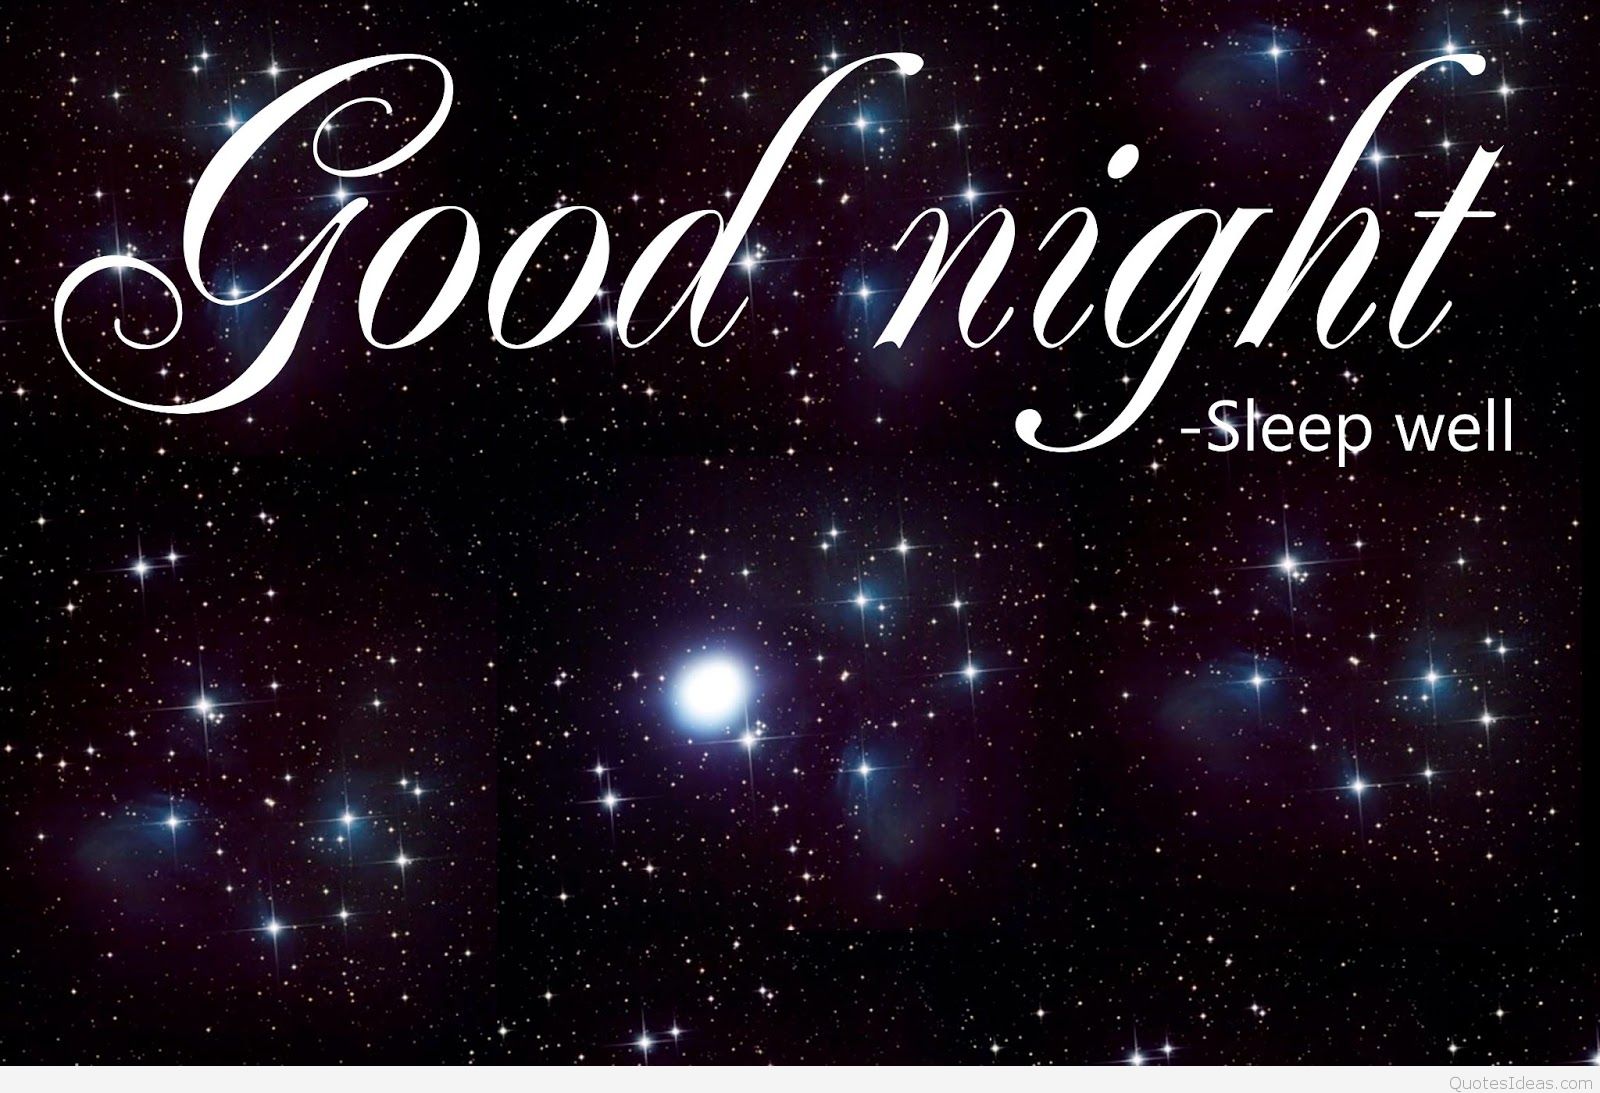 good night wishes wallpaper,text,font,sky,astronomical object,space